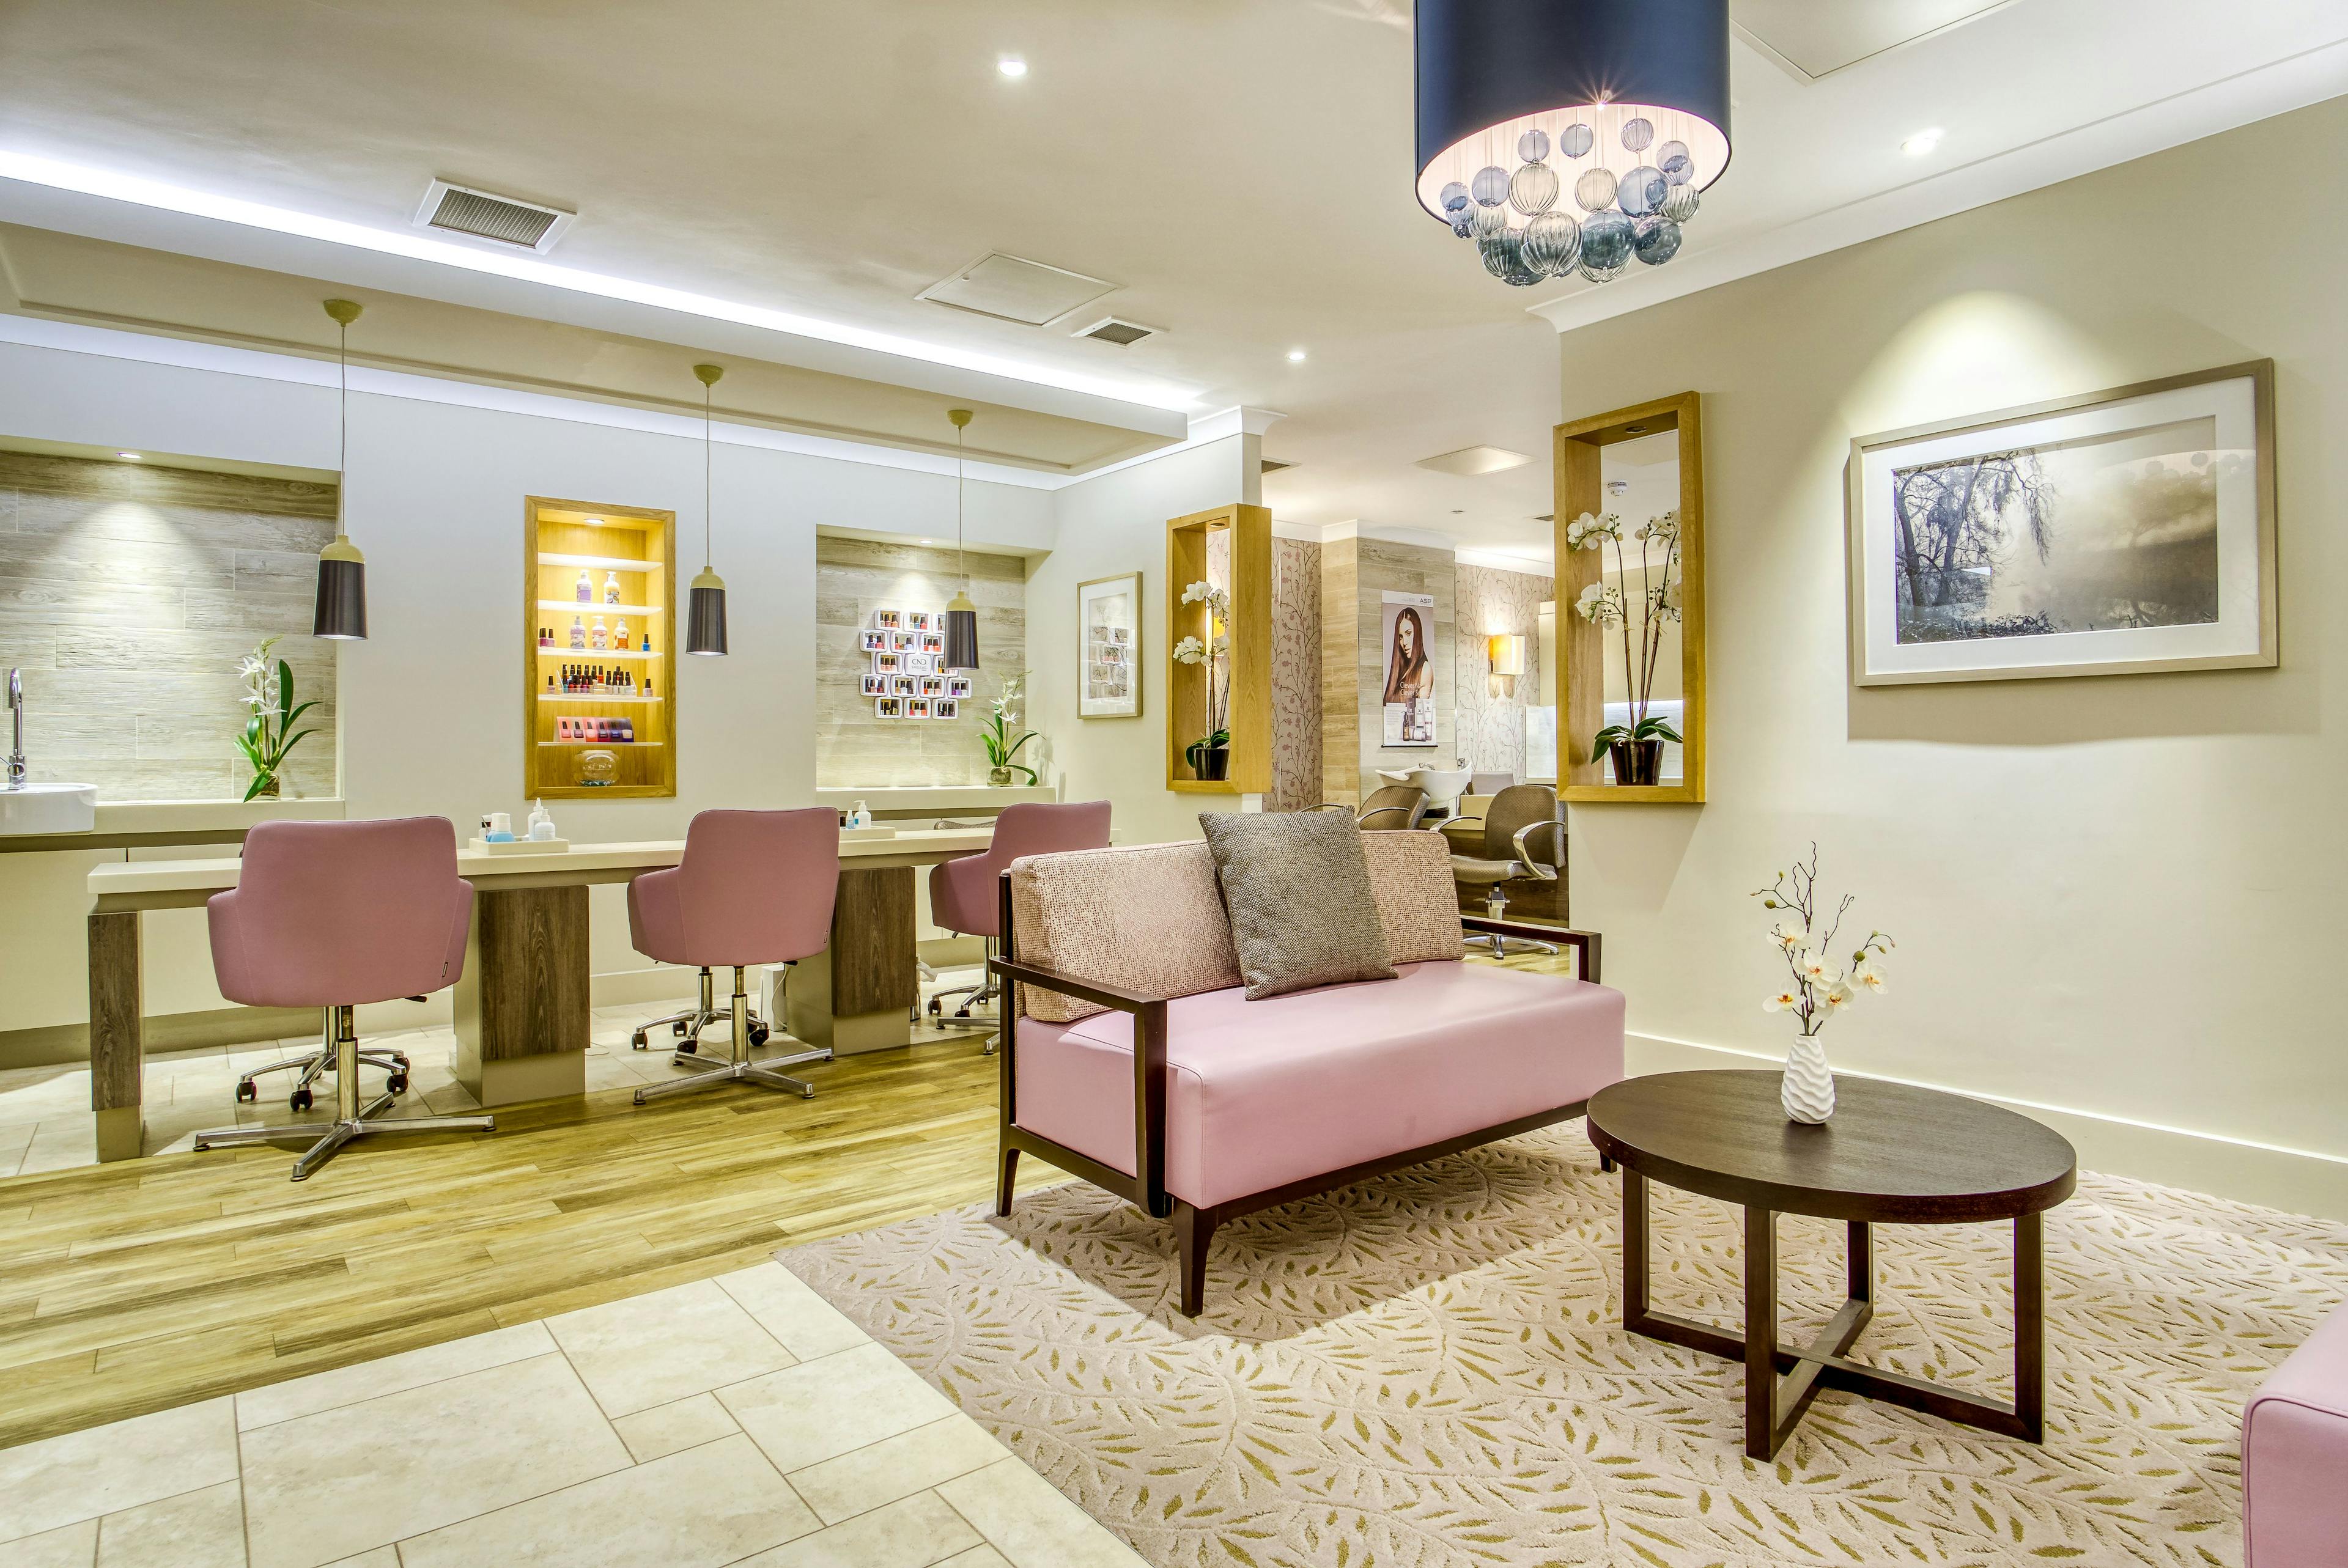 Salon of Witney care home in Witney, Oxfordshire